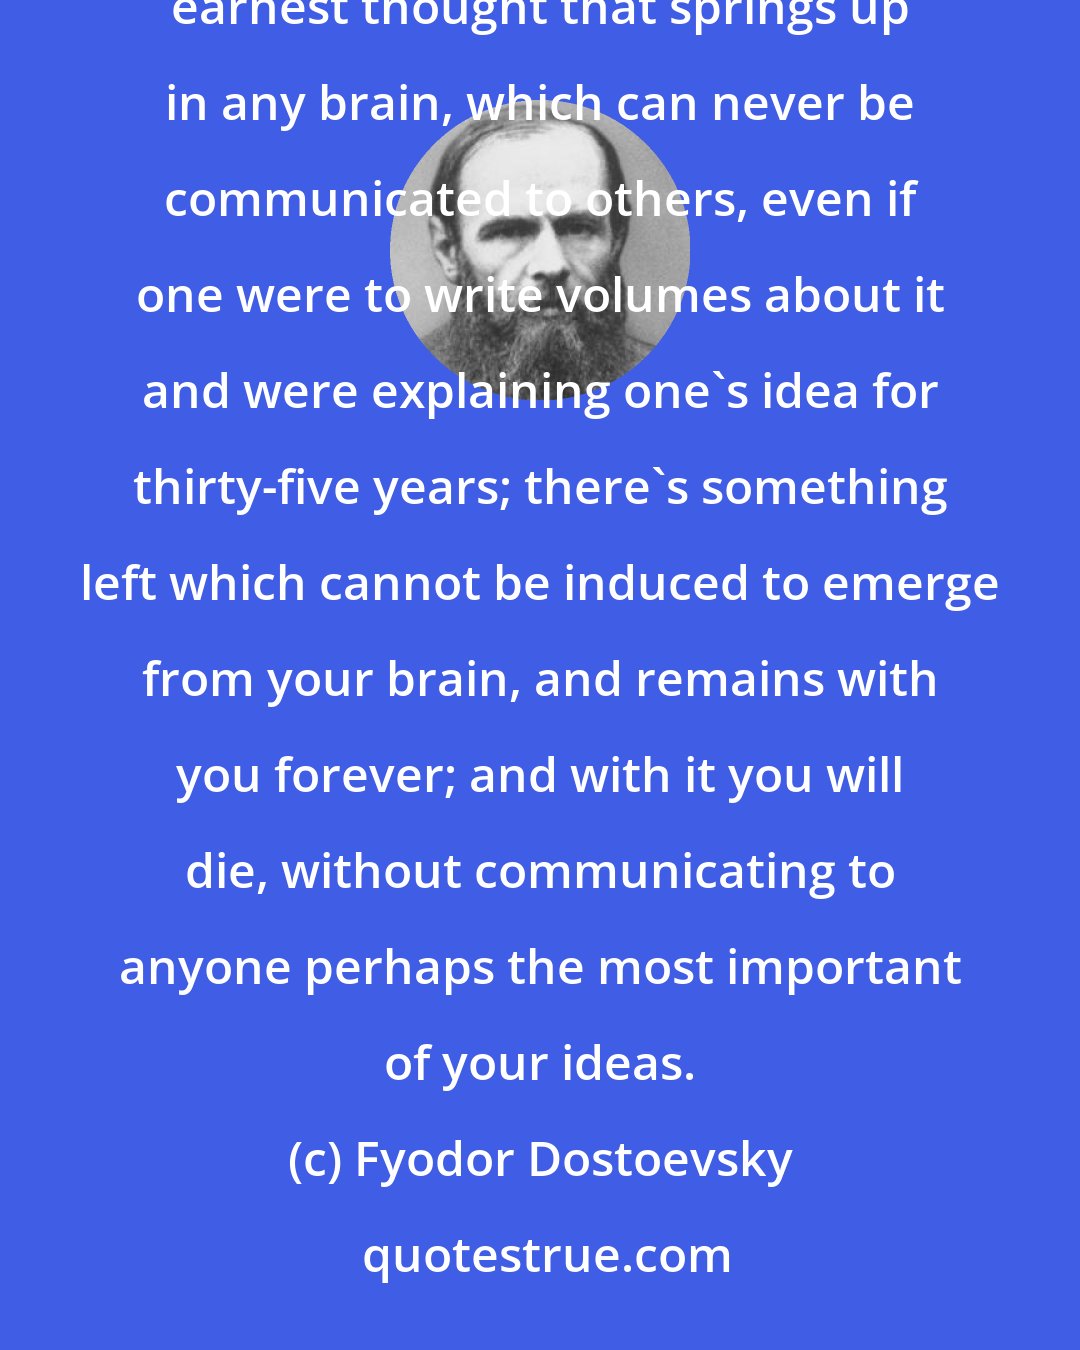 Fyodor Dostoevsky: There is something at the bottom of every new human thought, every thought of genius, or even every earnest thought that springs up in any brain, which can never be communicated to others, even if one were to write volumes about it and were explaining one's idea for thirty-five years; there's something left which cannot be induced to emerge from your brain, and remains with you forever; and with it you will die, without communicating to anyone perhaps the most important of your ideas.